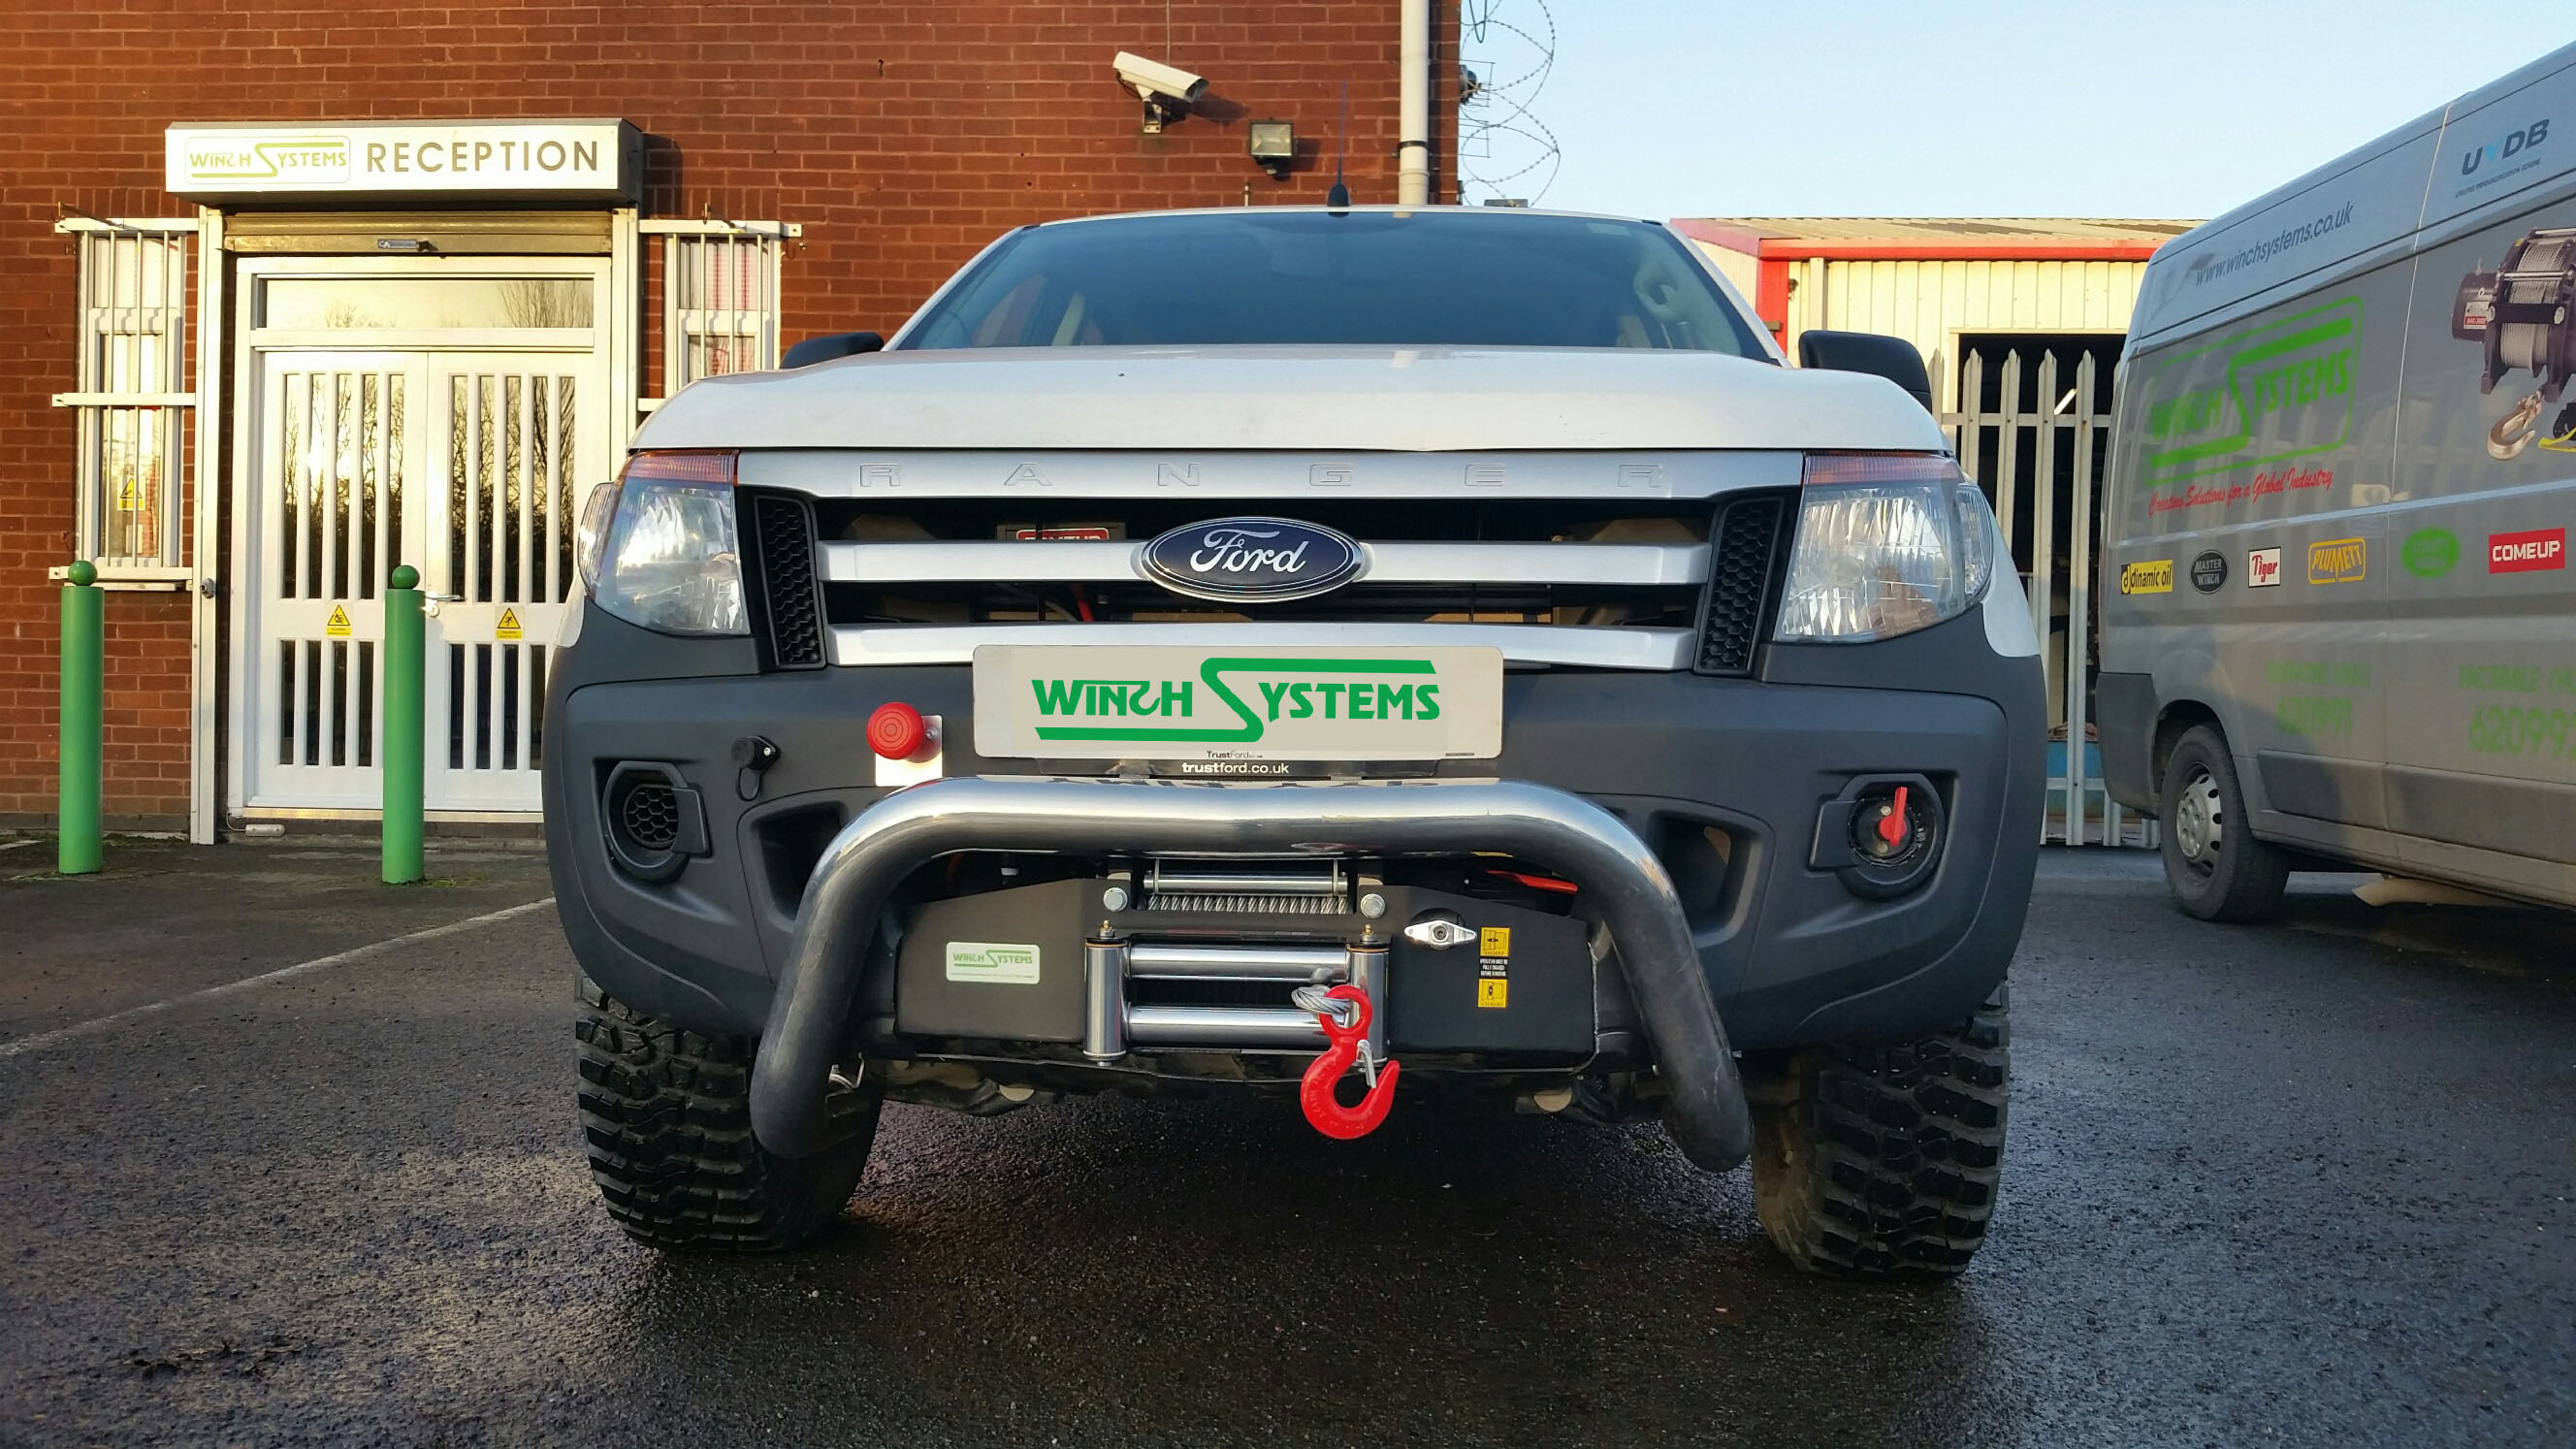 Main image for Winch Systems Ltd